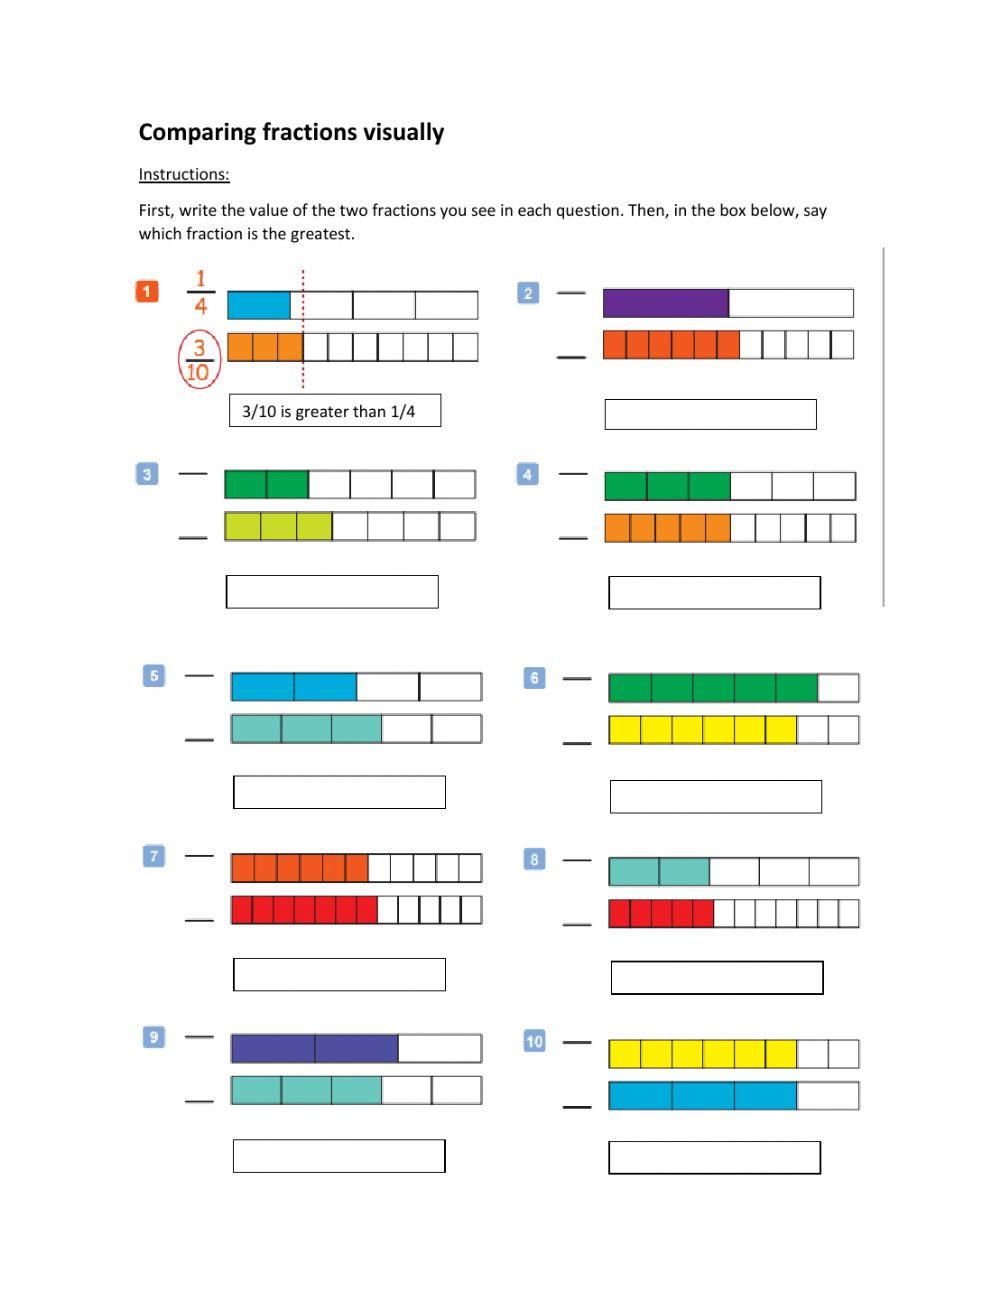 Comparing fractions visually